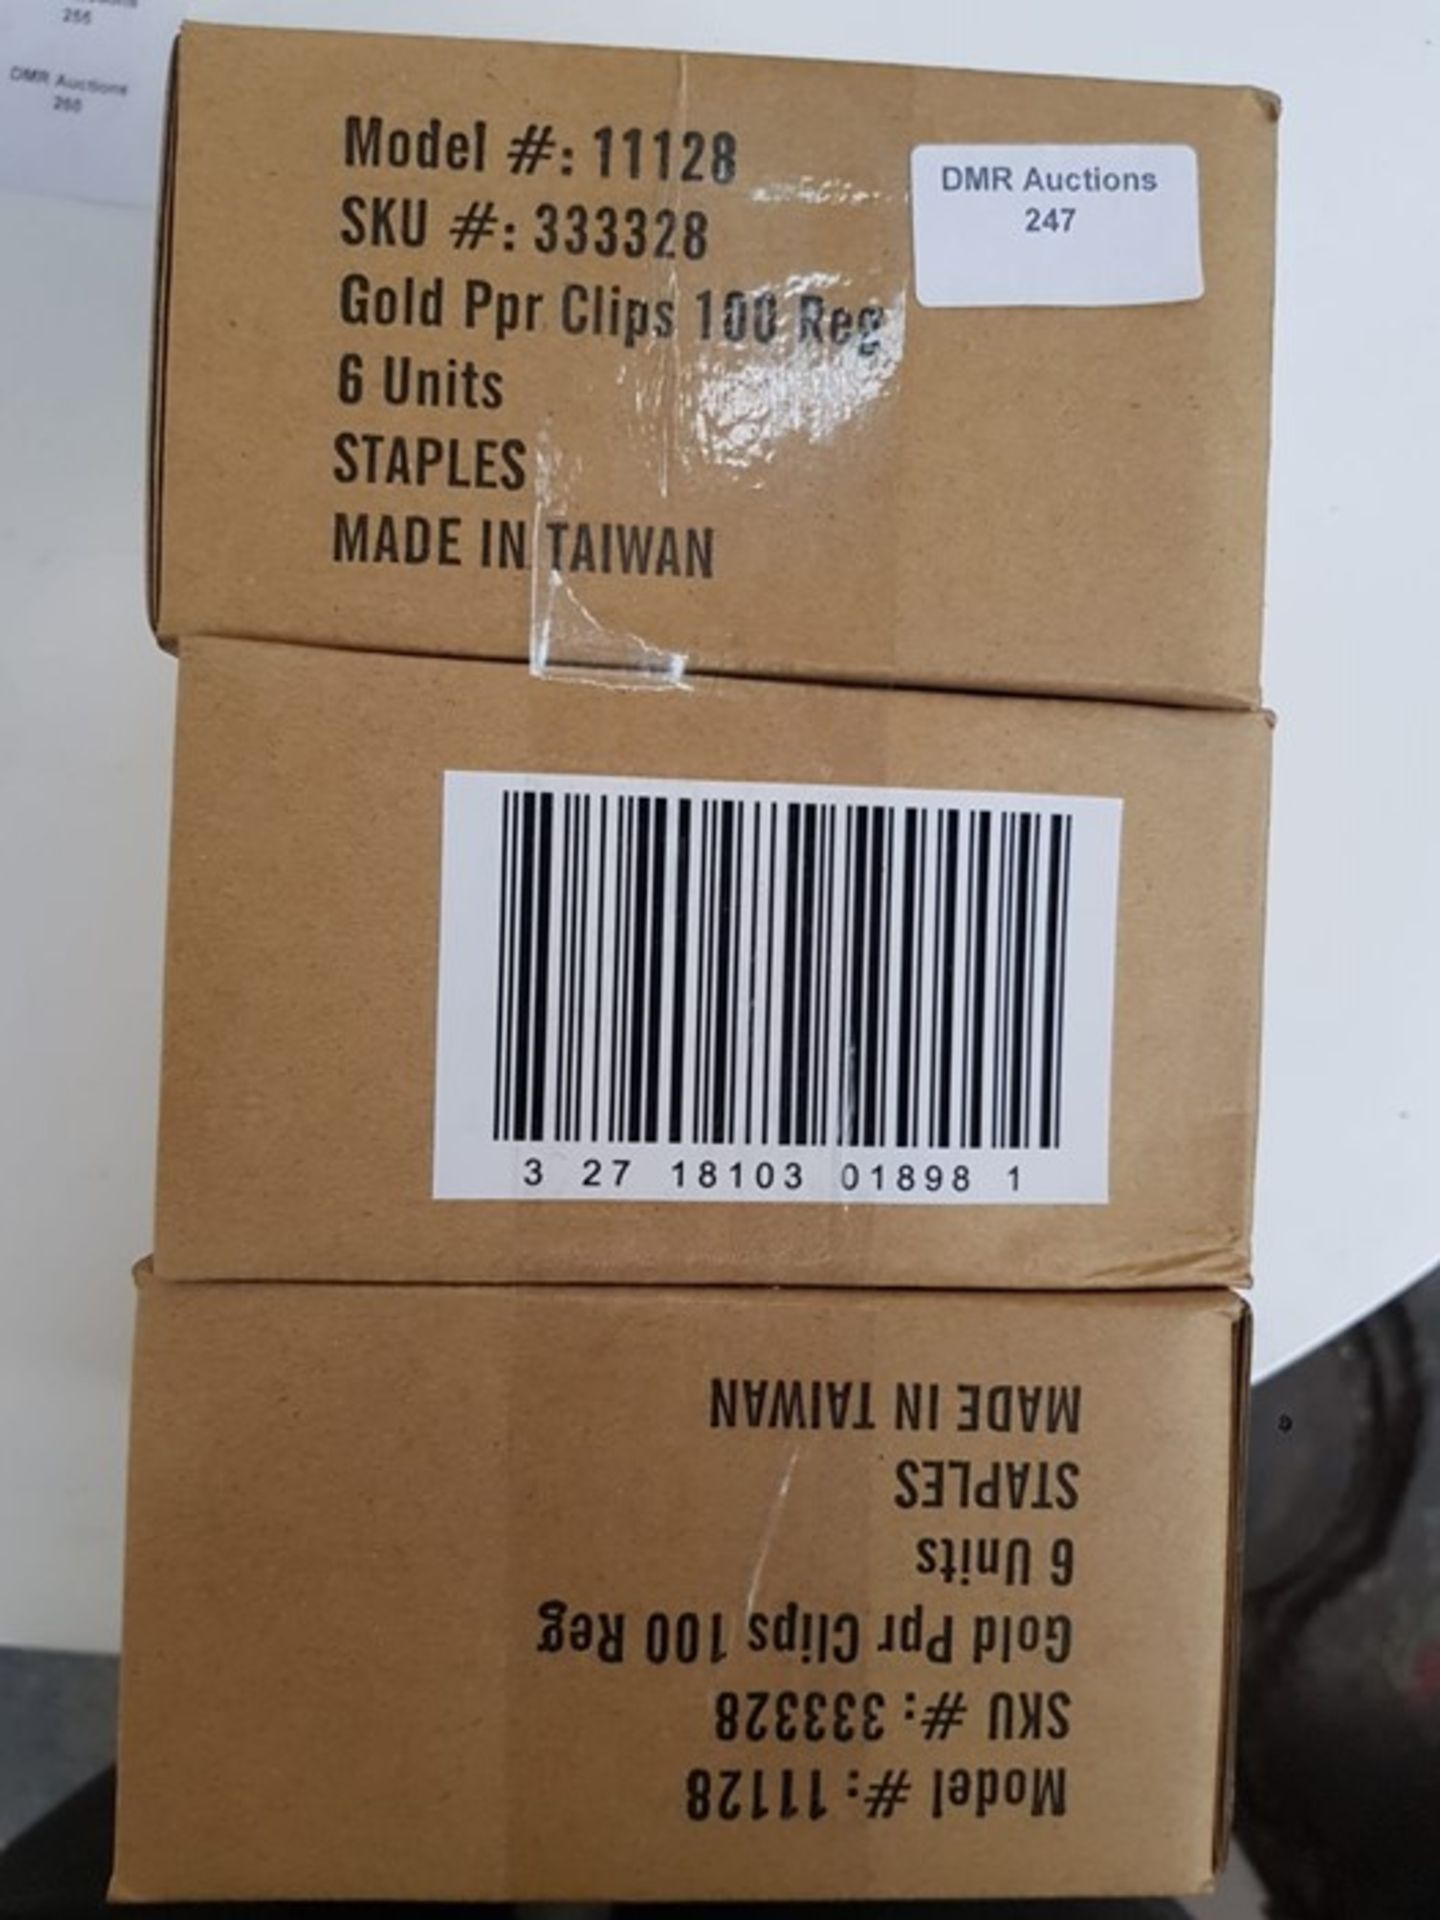 1 LOT TO CONTAIN 6 BOXES OF GOLD PPR CLIPS / RRP £30.00 (PUBLIC VIEWING AVAILABLE)